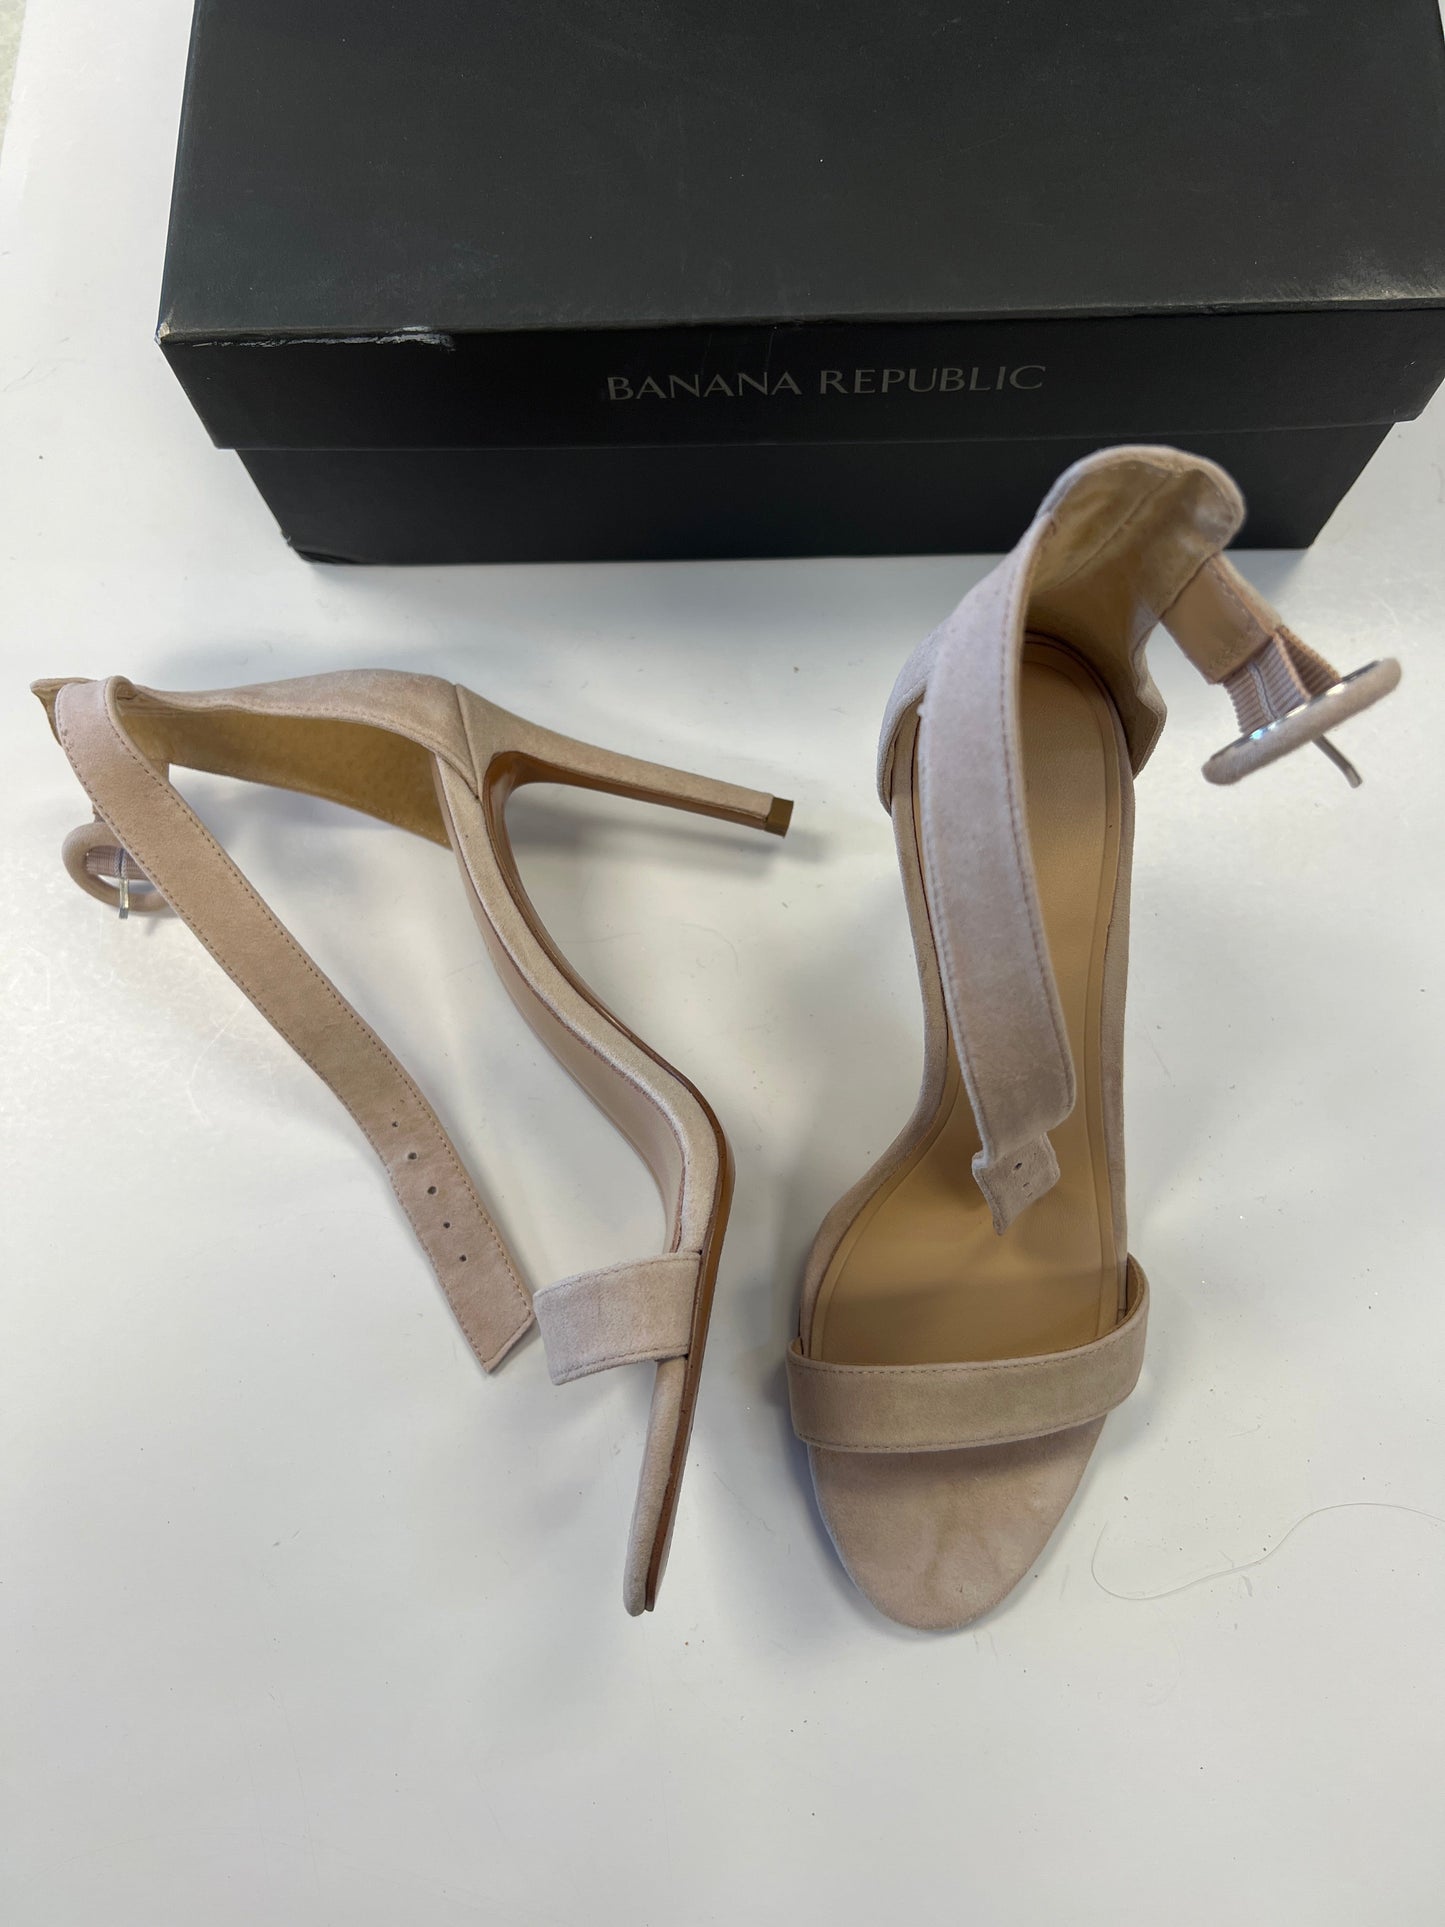 Shoes Heels Stiletto By Banana Republic  Size: 7.5